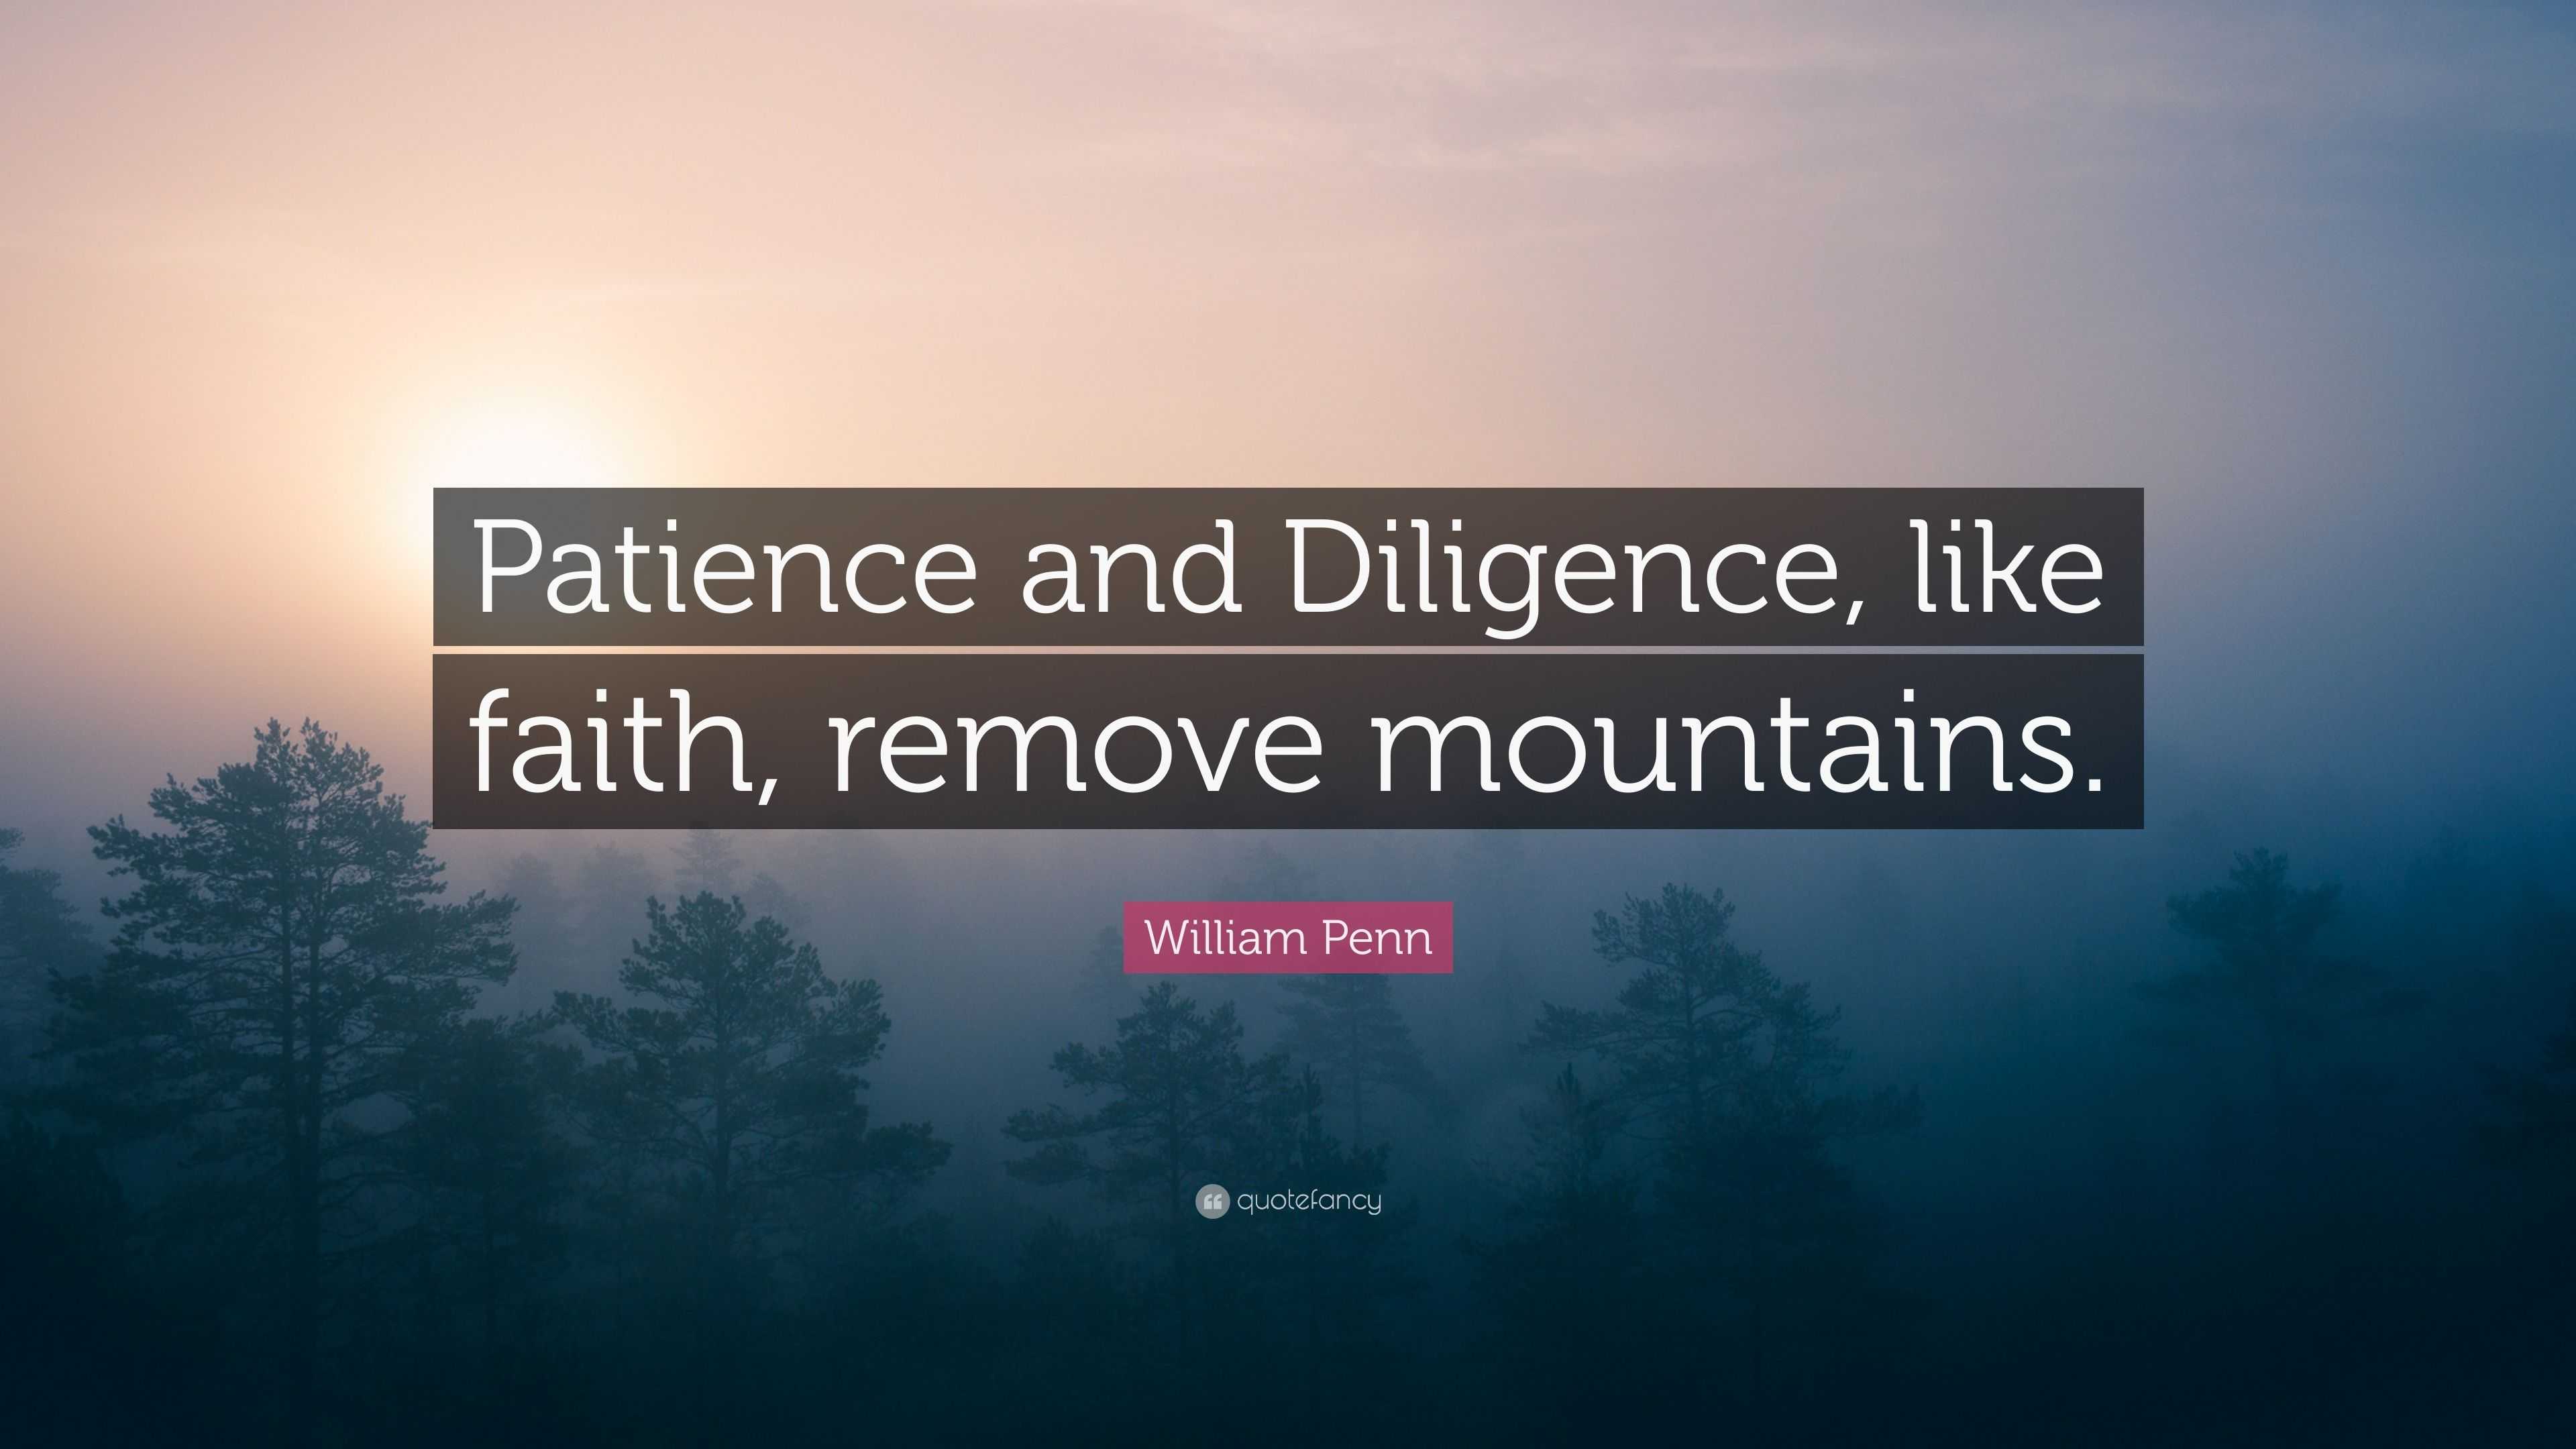 William Penn Quote: “Patience and Diligence, like faith, remove mountains.”